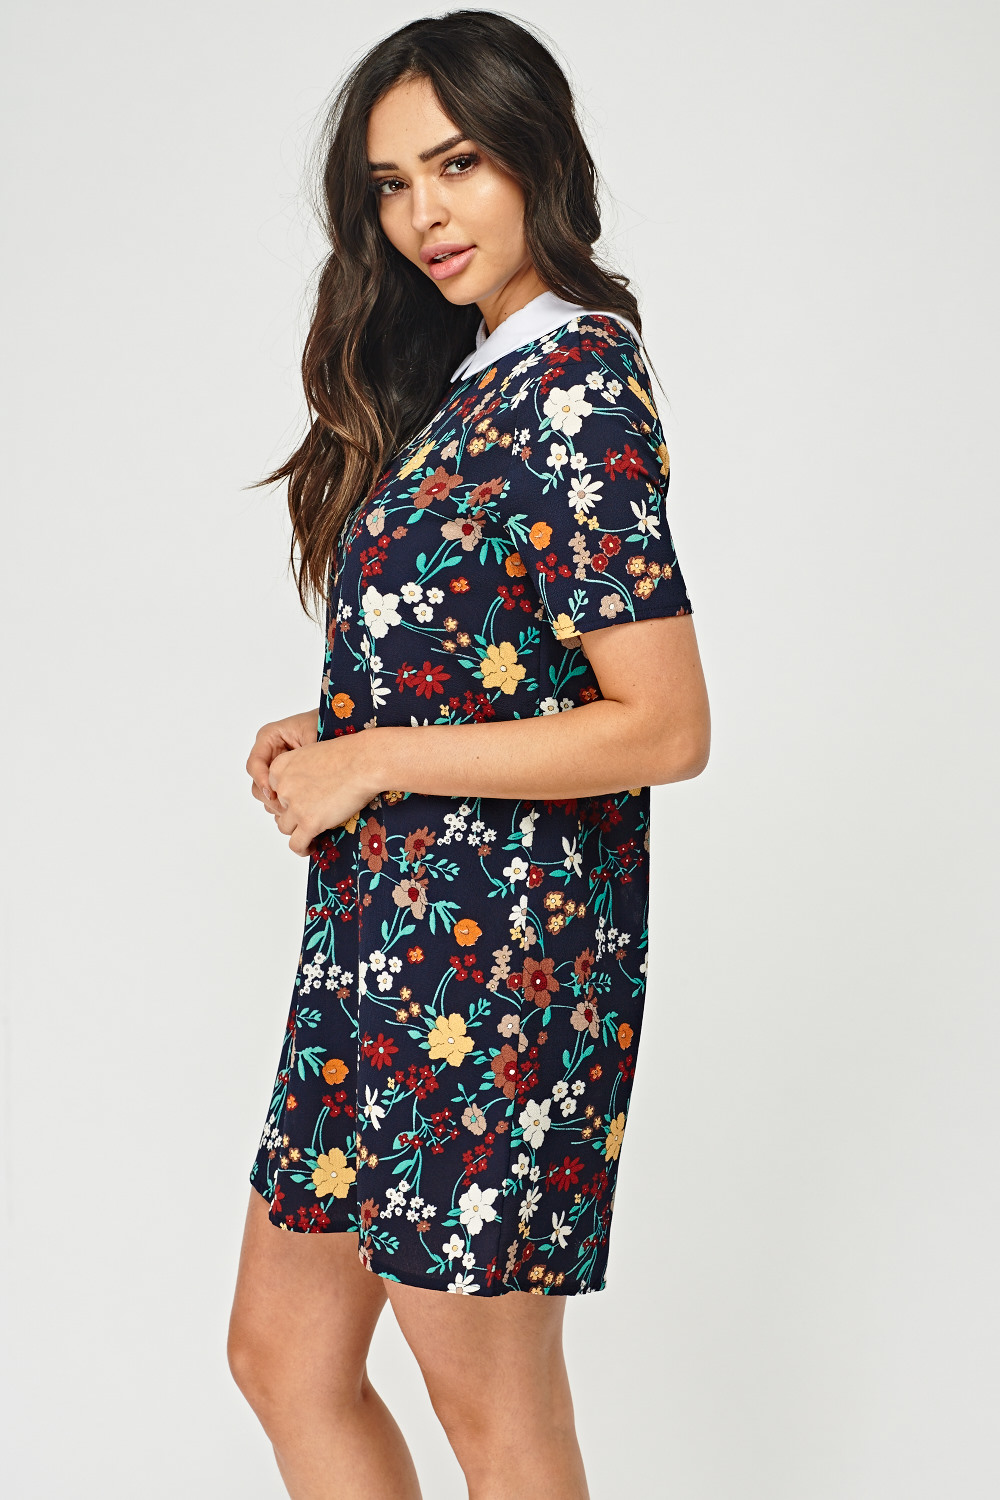 Contrast Collar Printed Shift Dress - Just $7